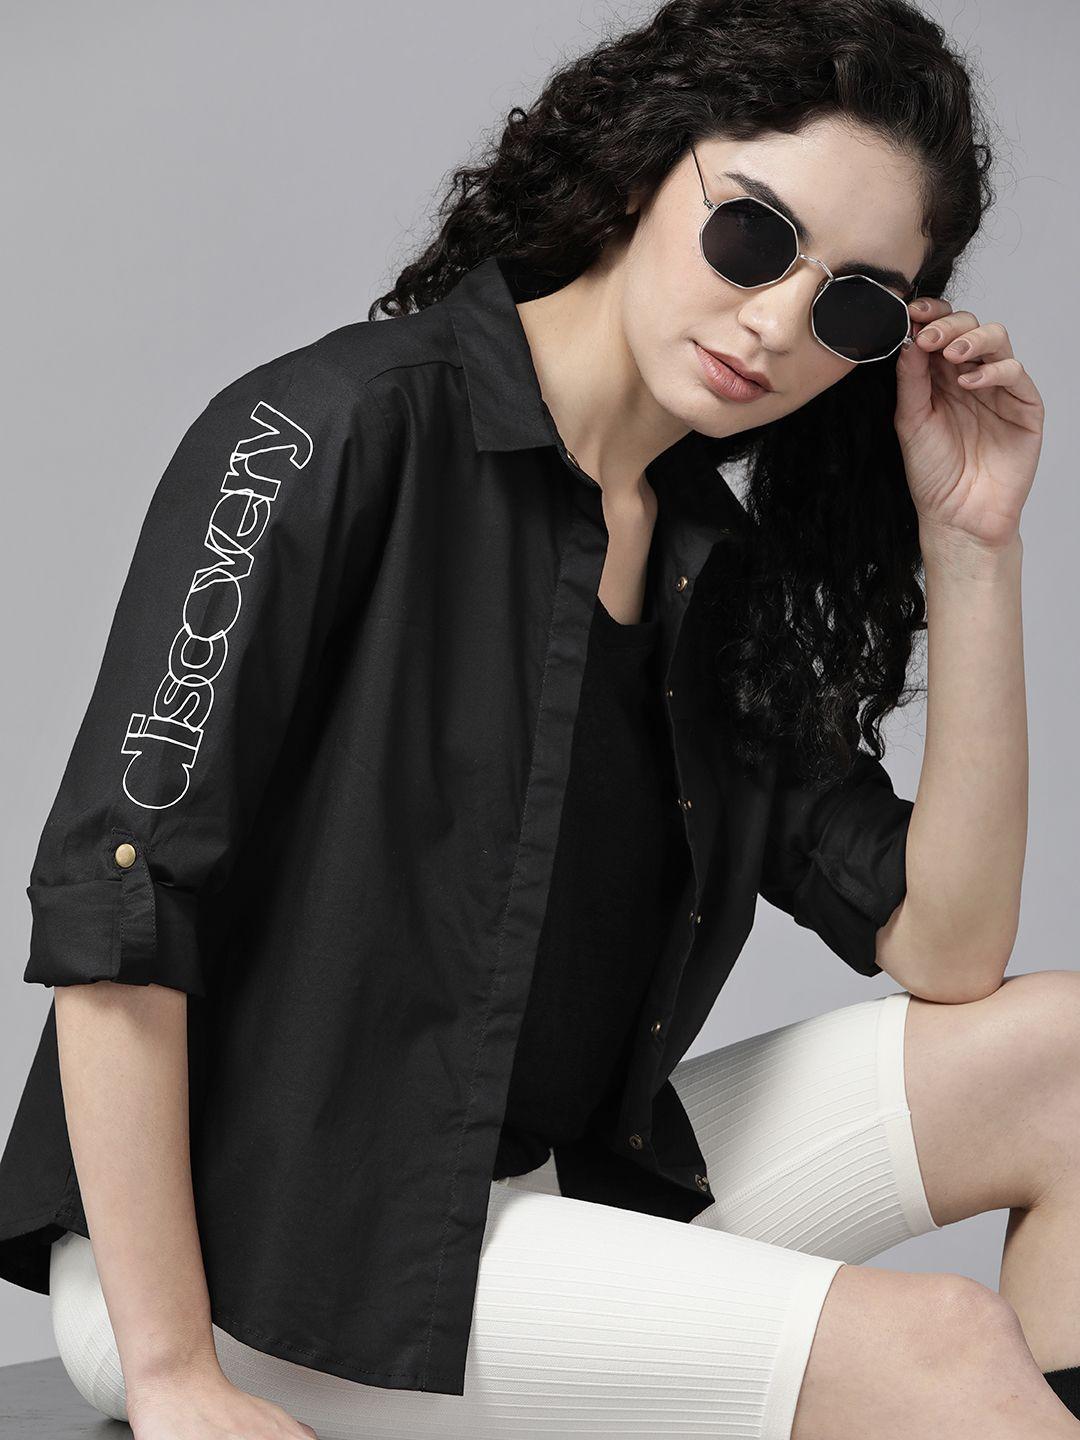 the roadster lifestyle co. x discovery women black solid casual shirt